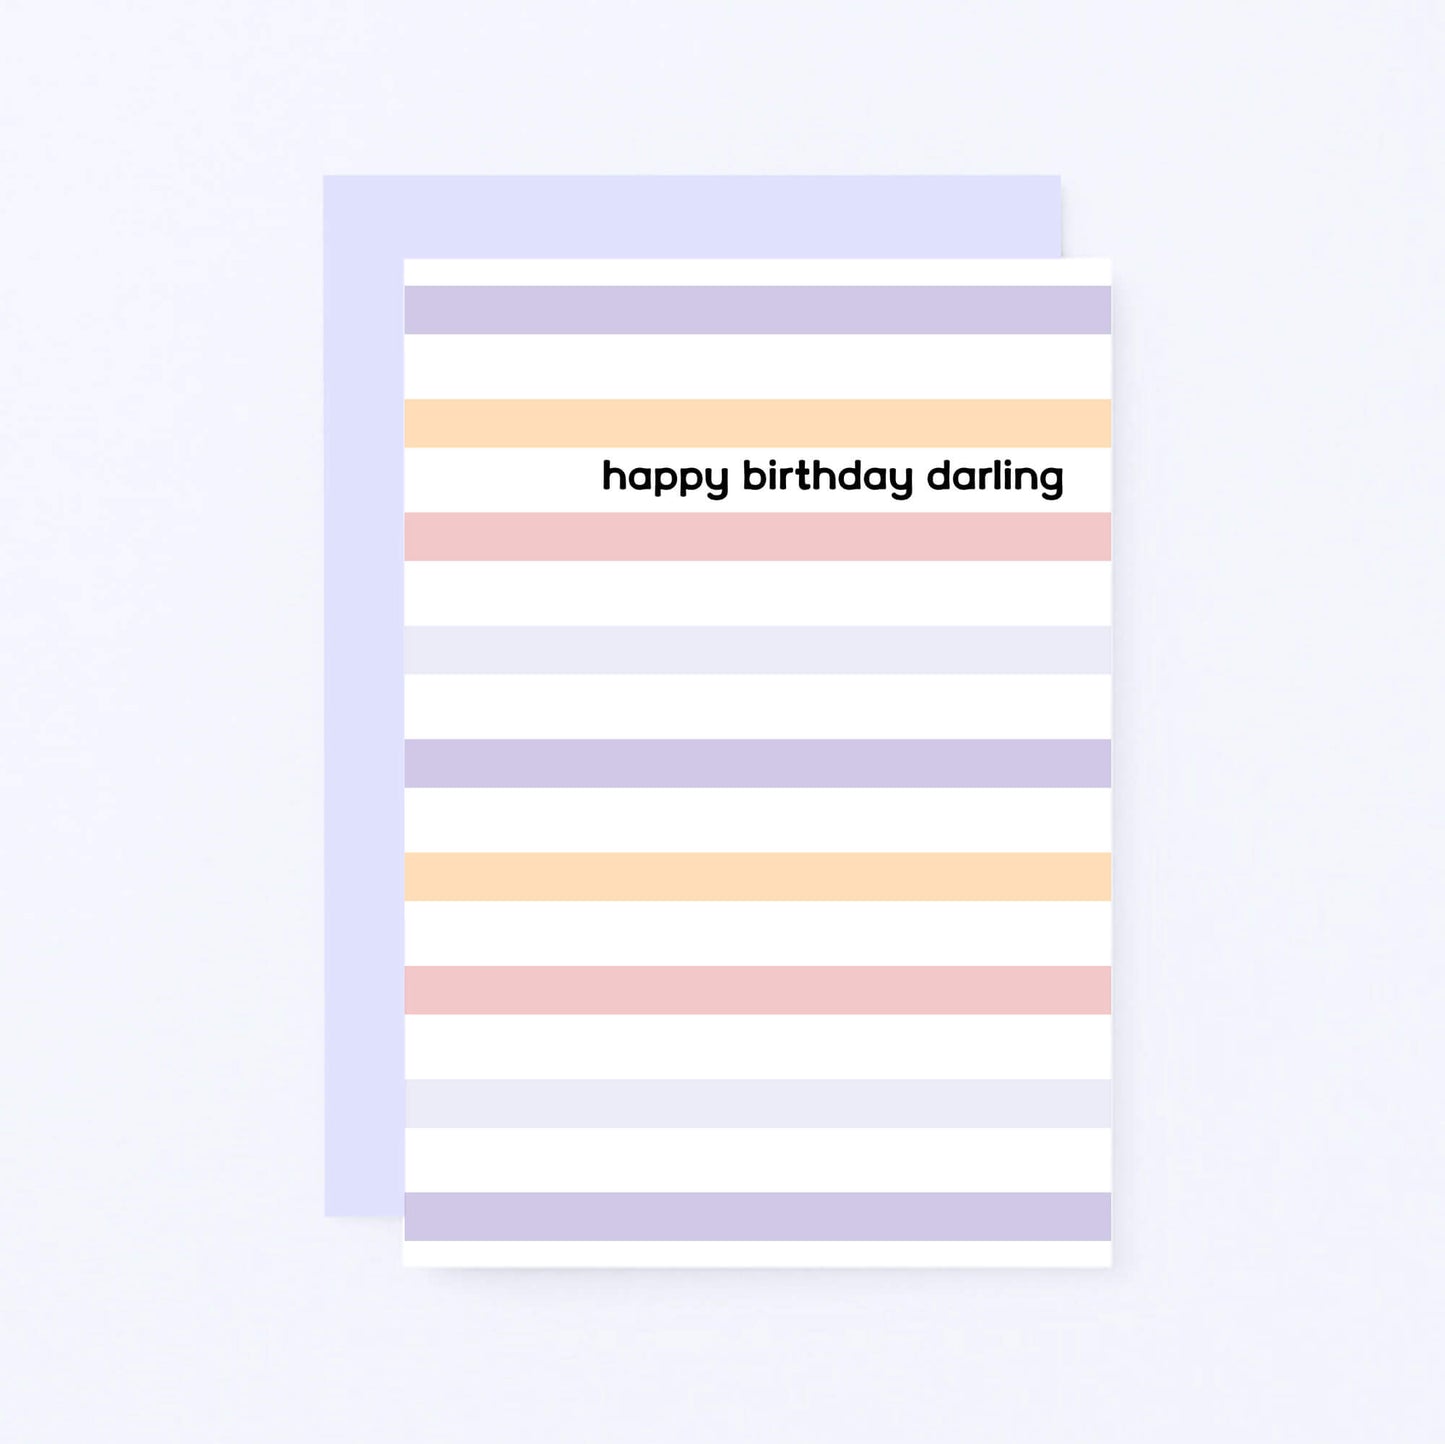 Happy Birthday Darling Card by SixElevenCreations. Product Code SE3501A6